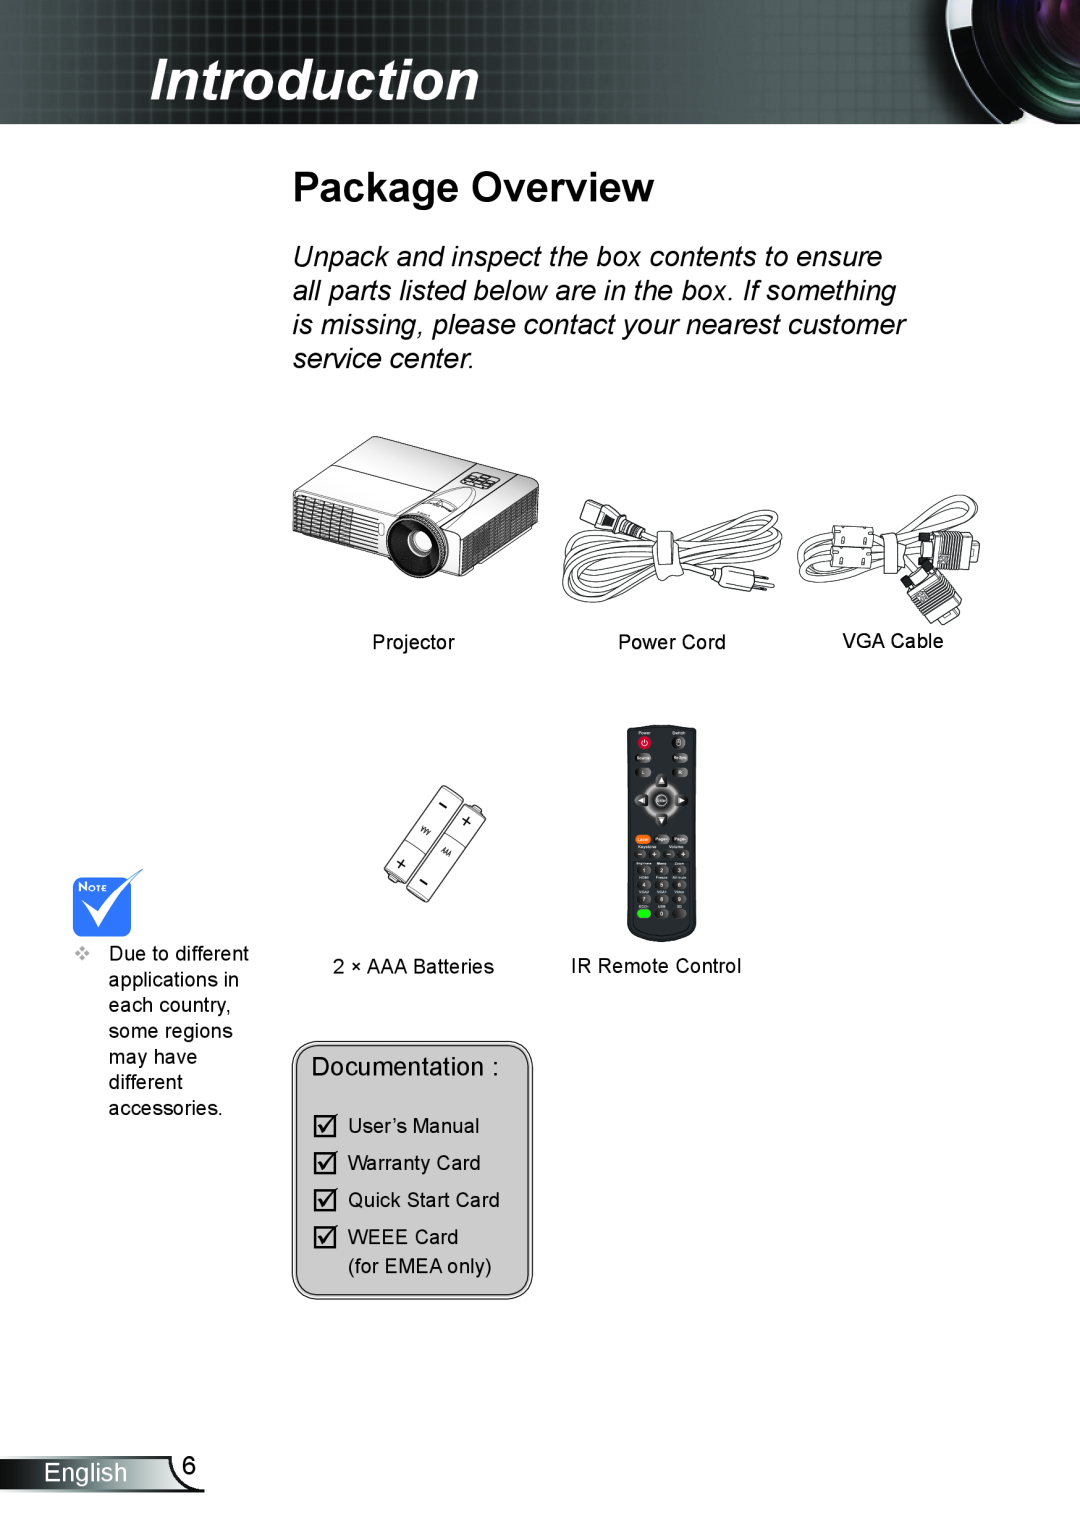 Optoma Technology TW6353D, TX6353D manual Introduction, Package Overview, English 